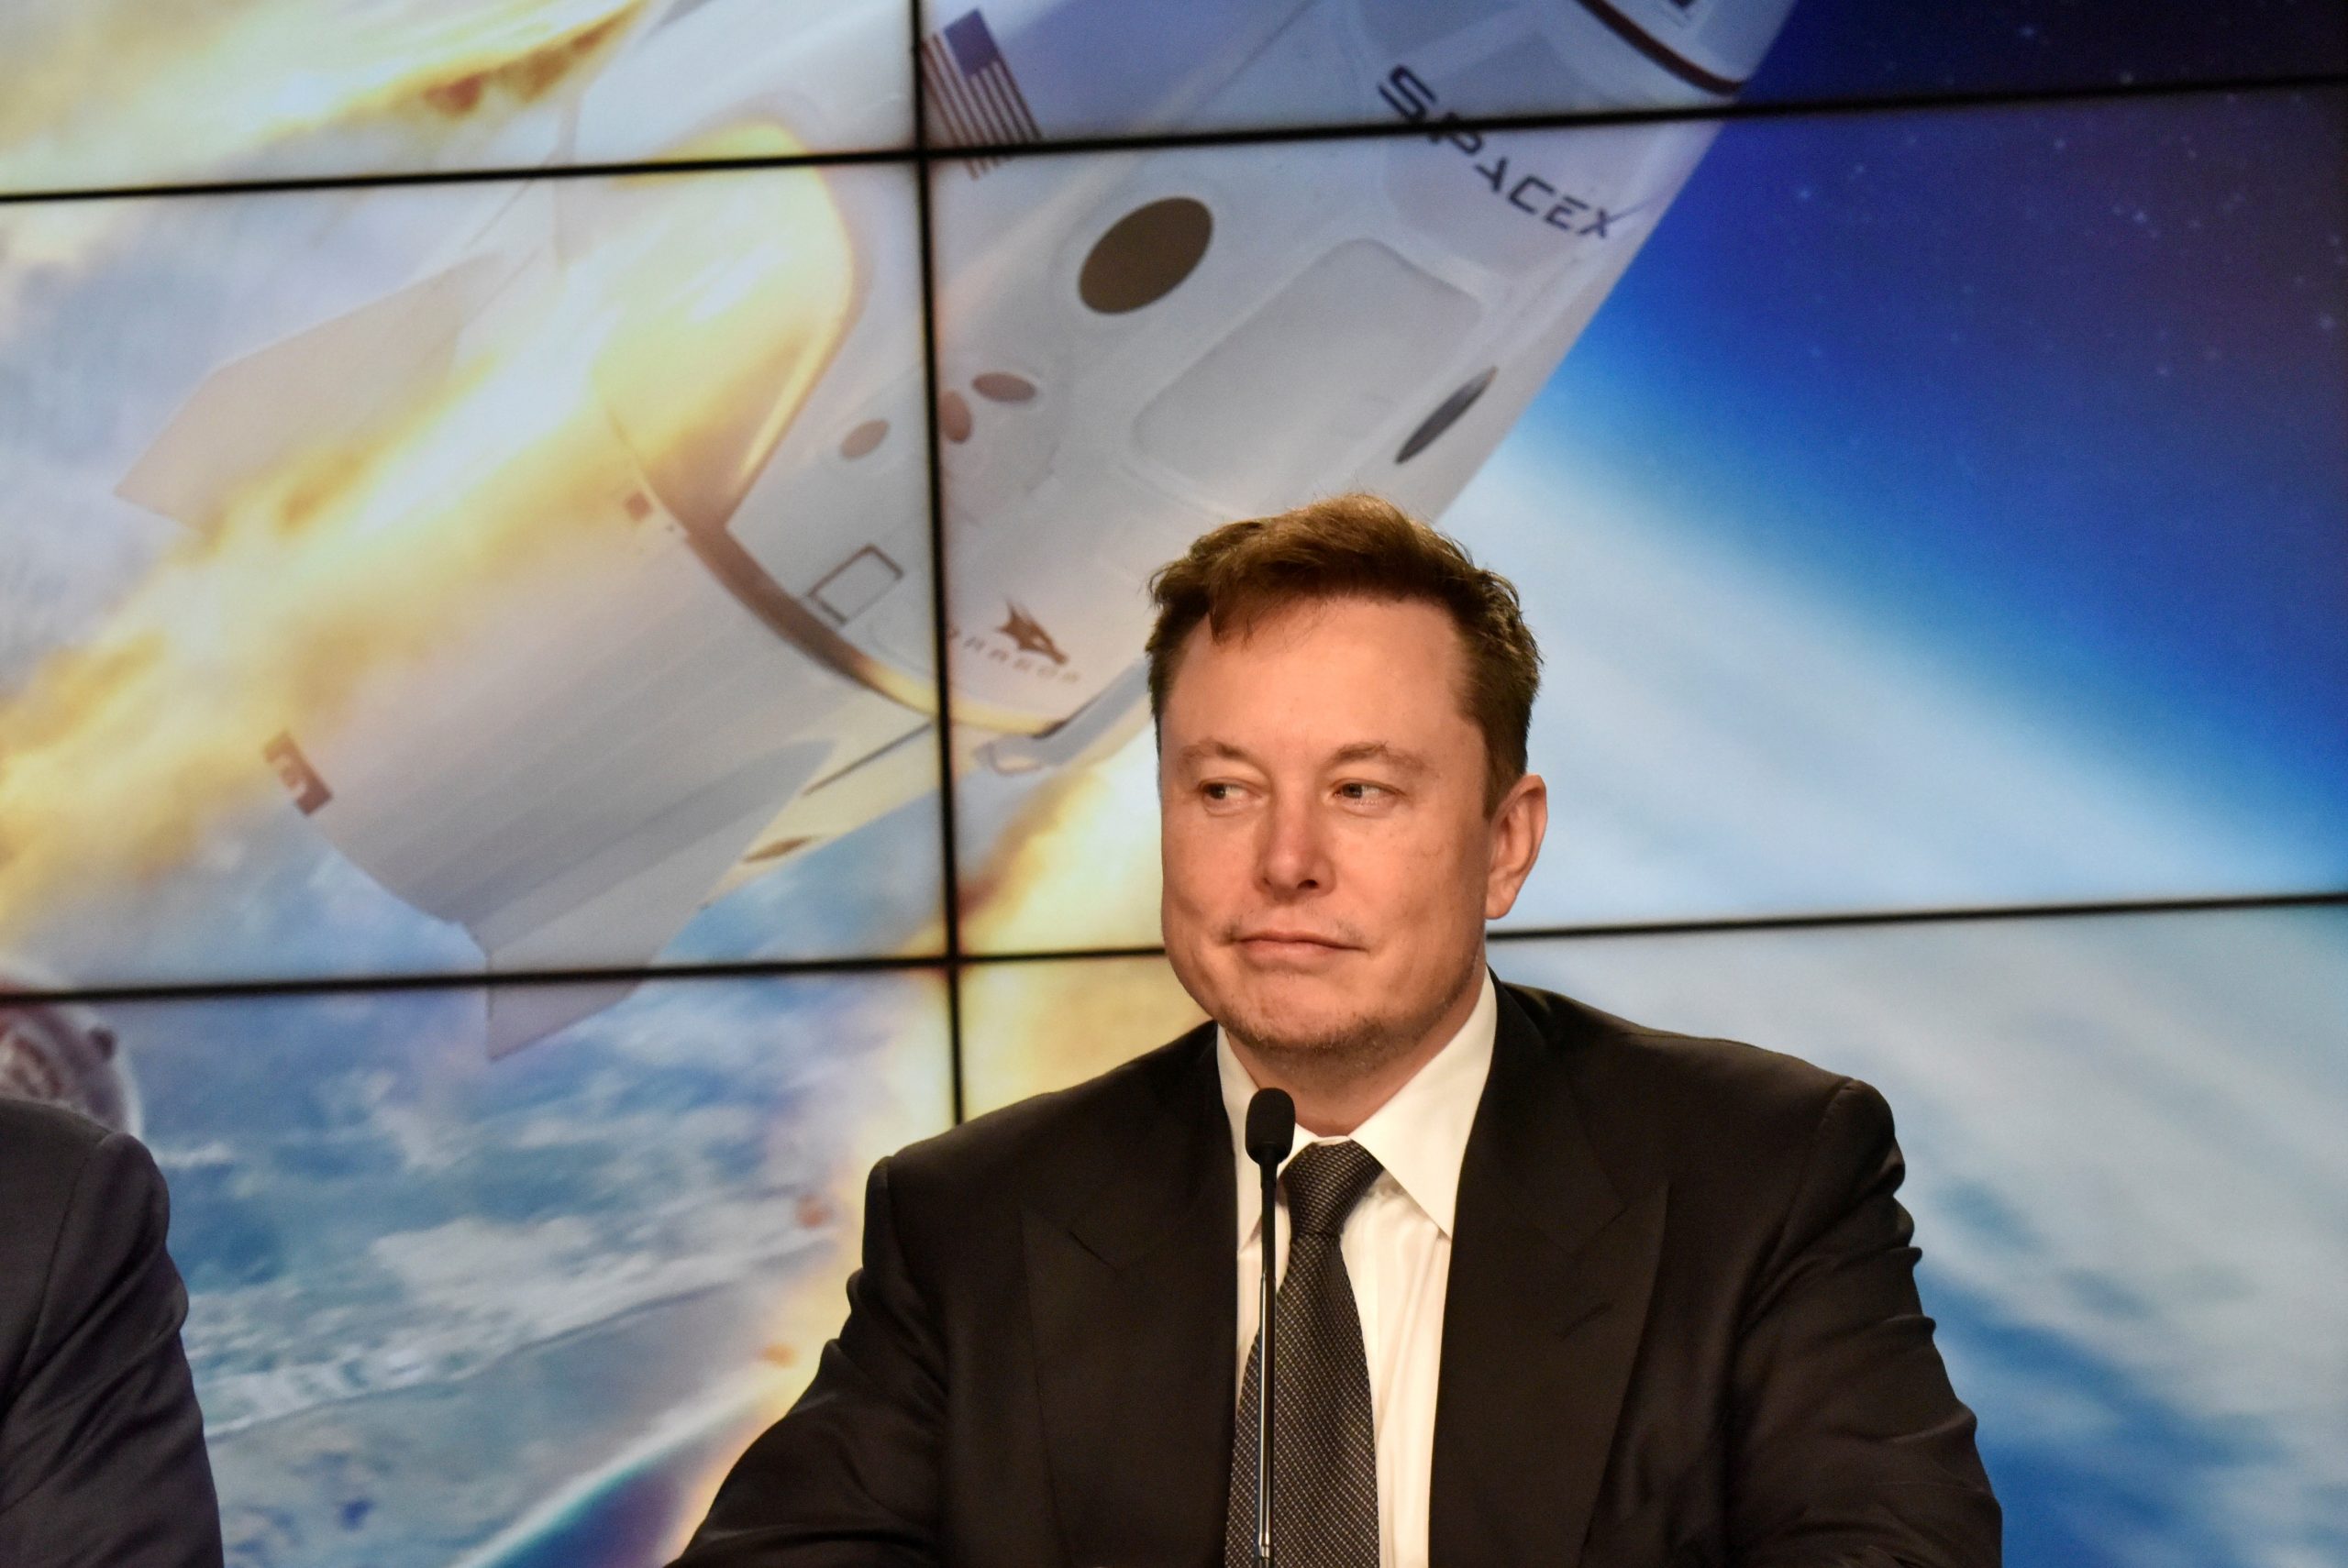  Musk says may need $30 bln to keep Starlink in orbit